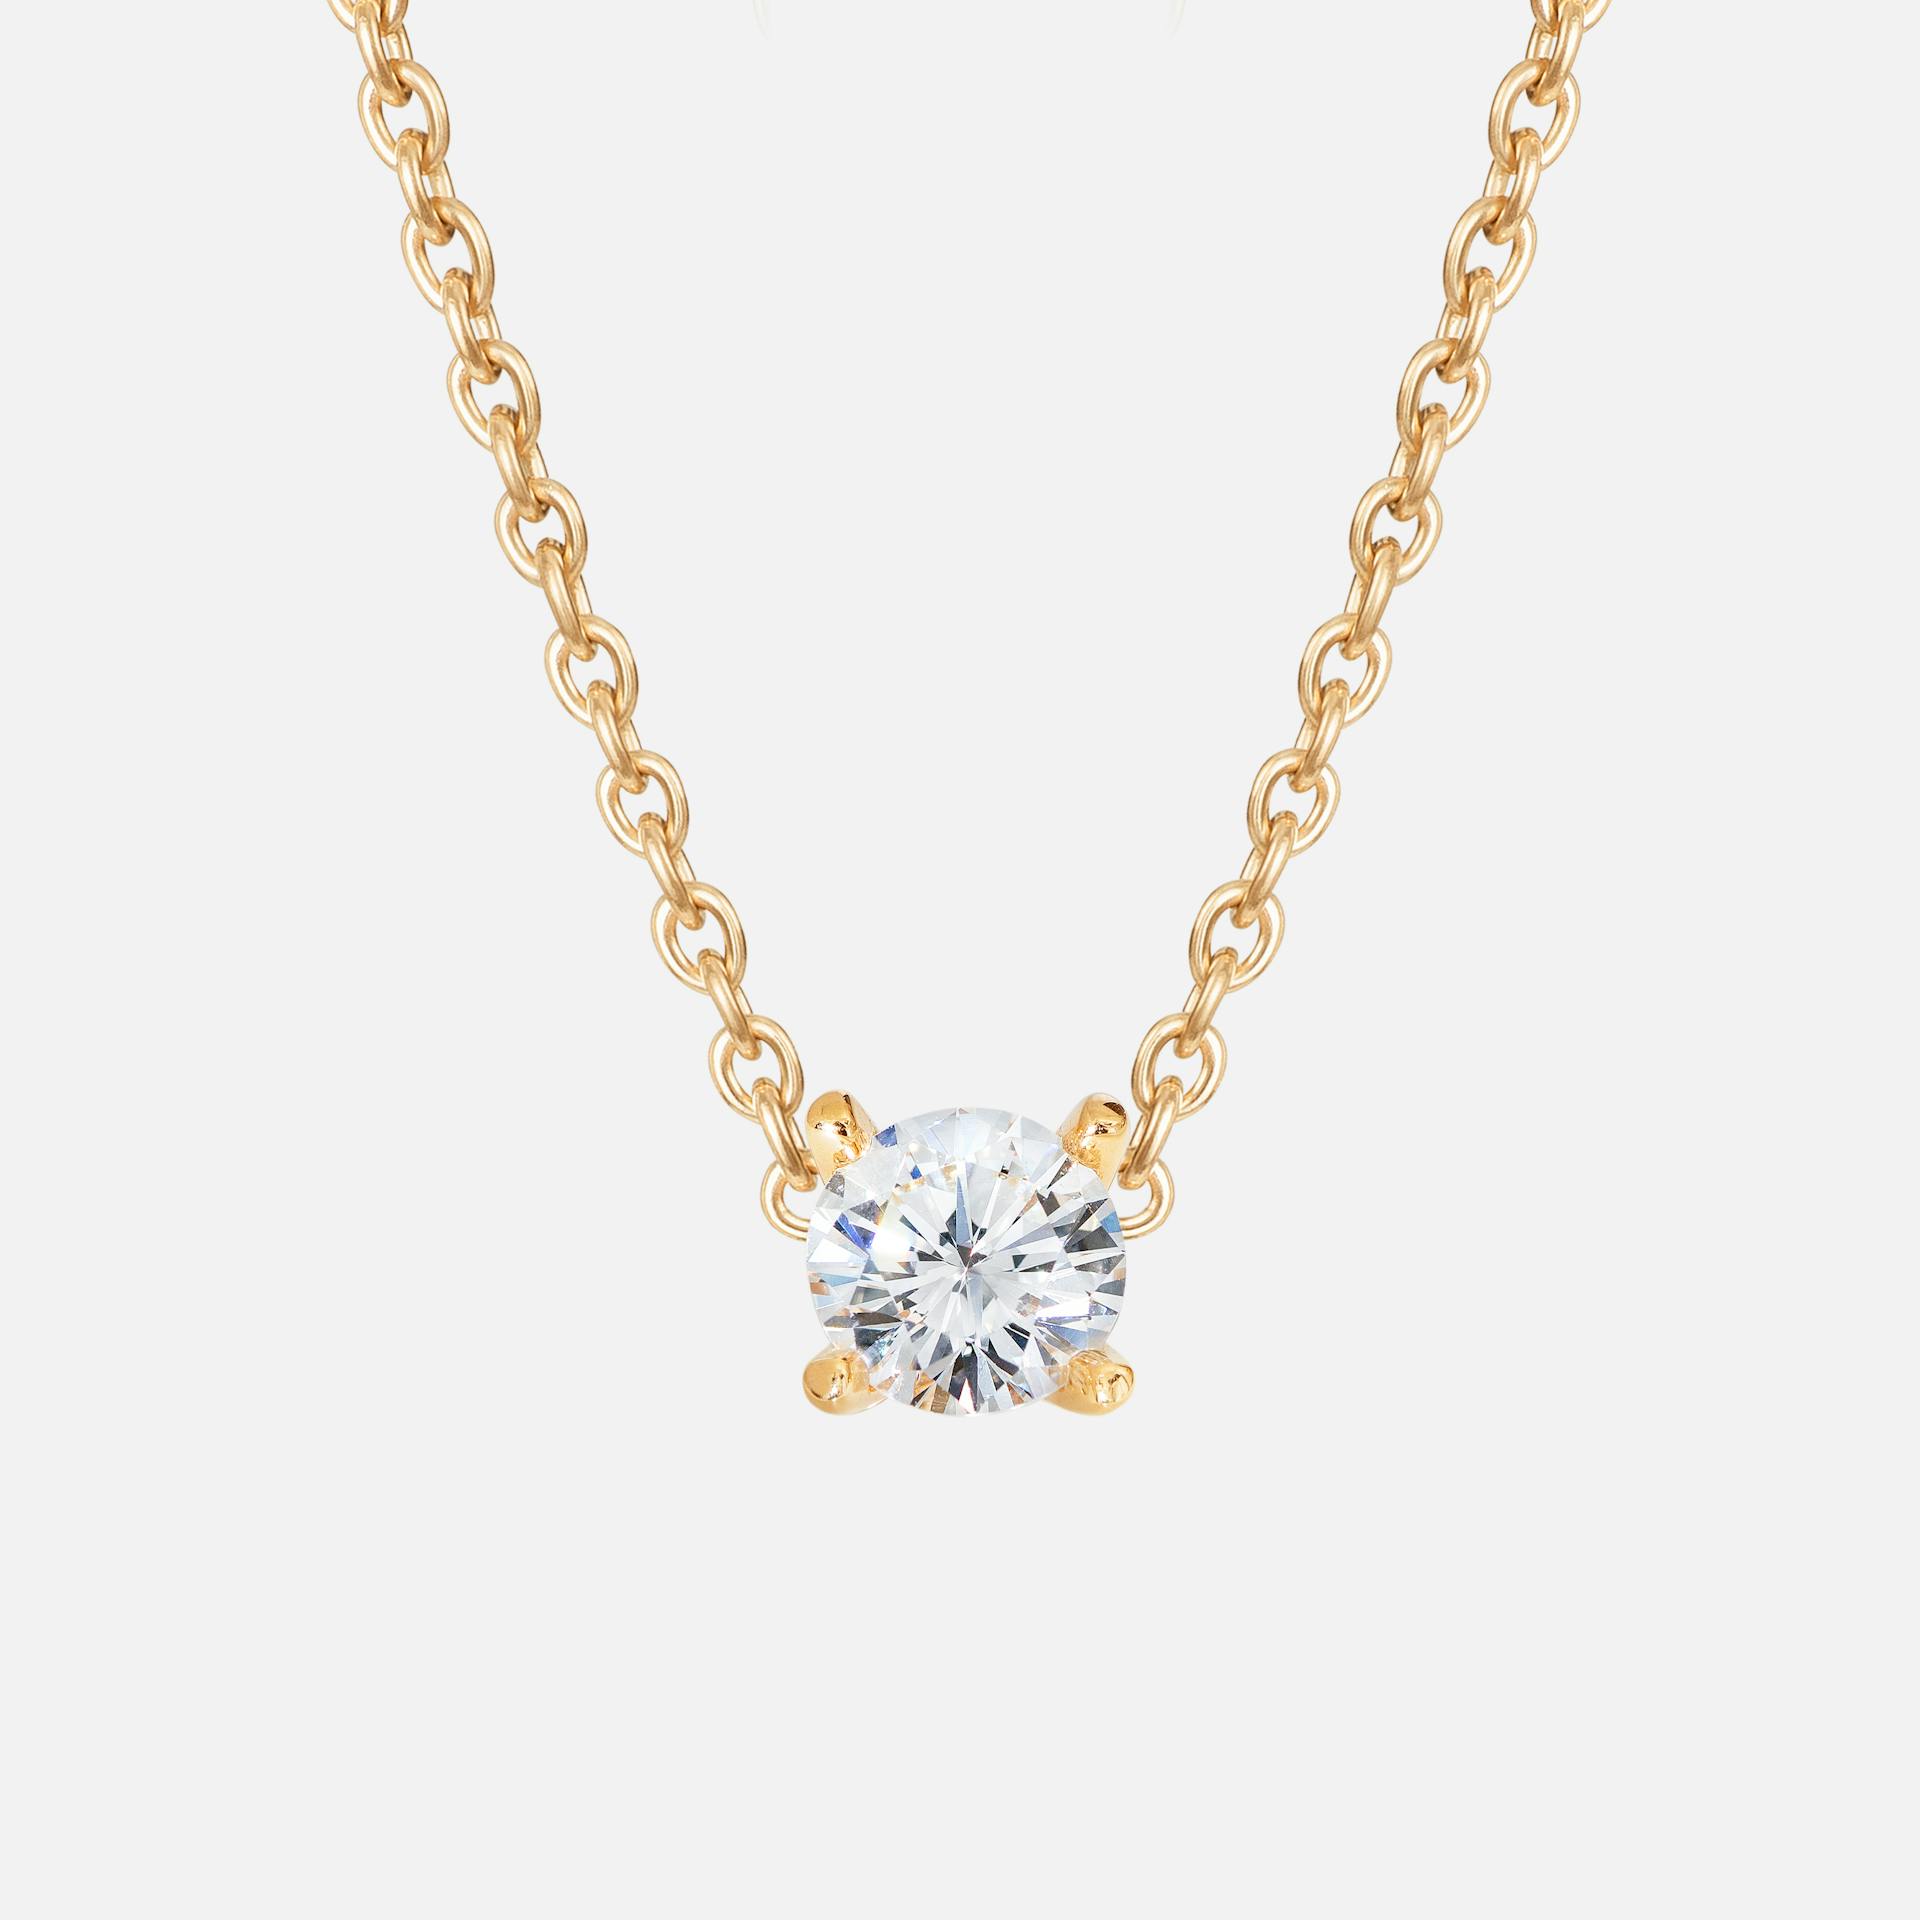 Solitaire necklace